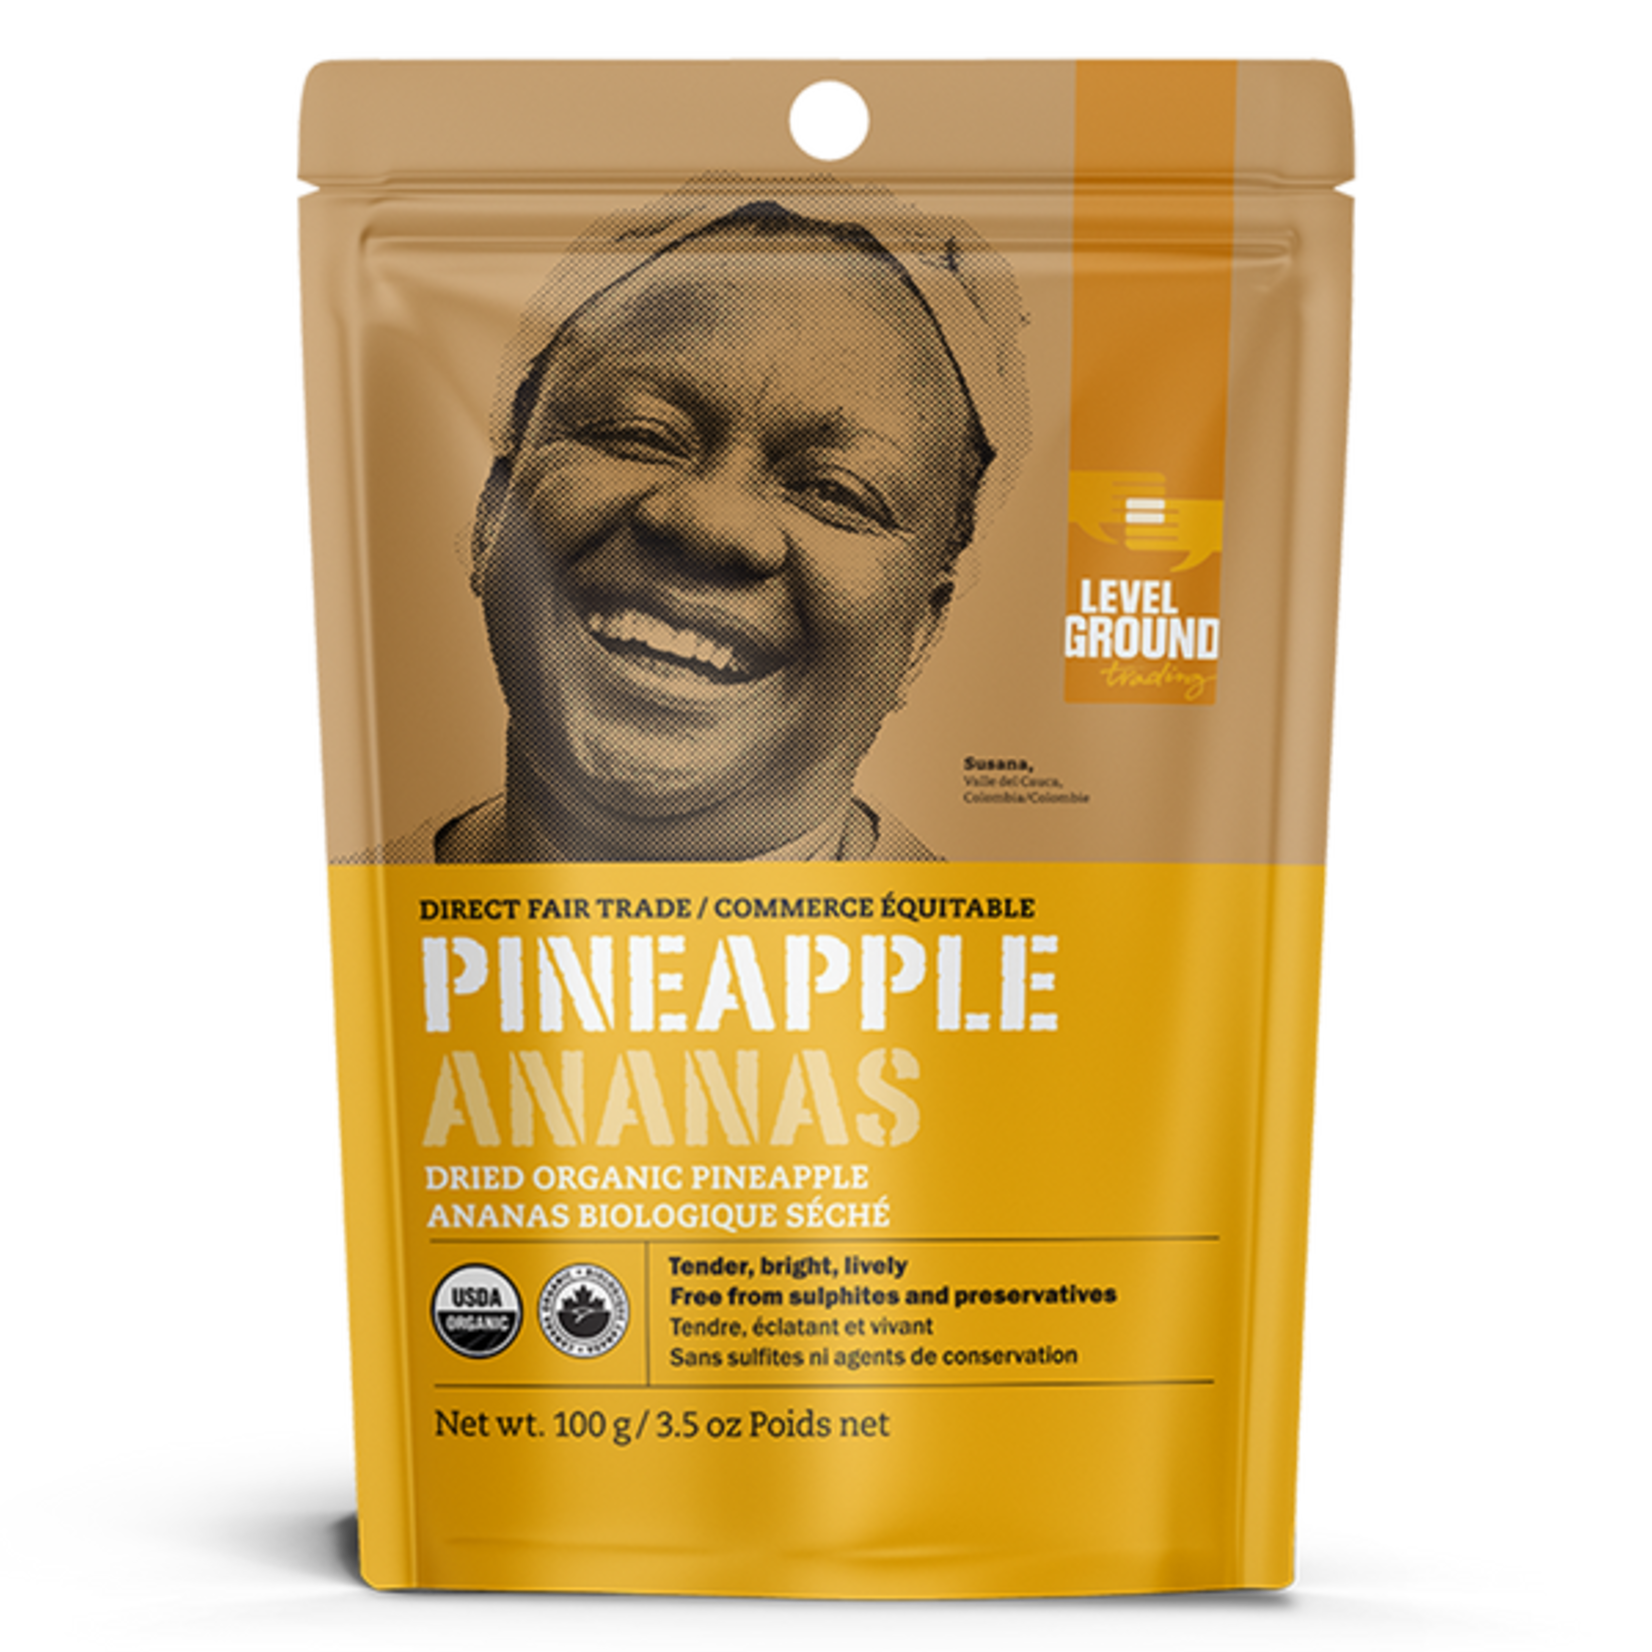 Level Ground Dried Fruit Pineapple